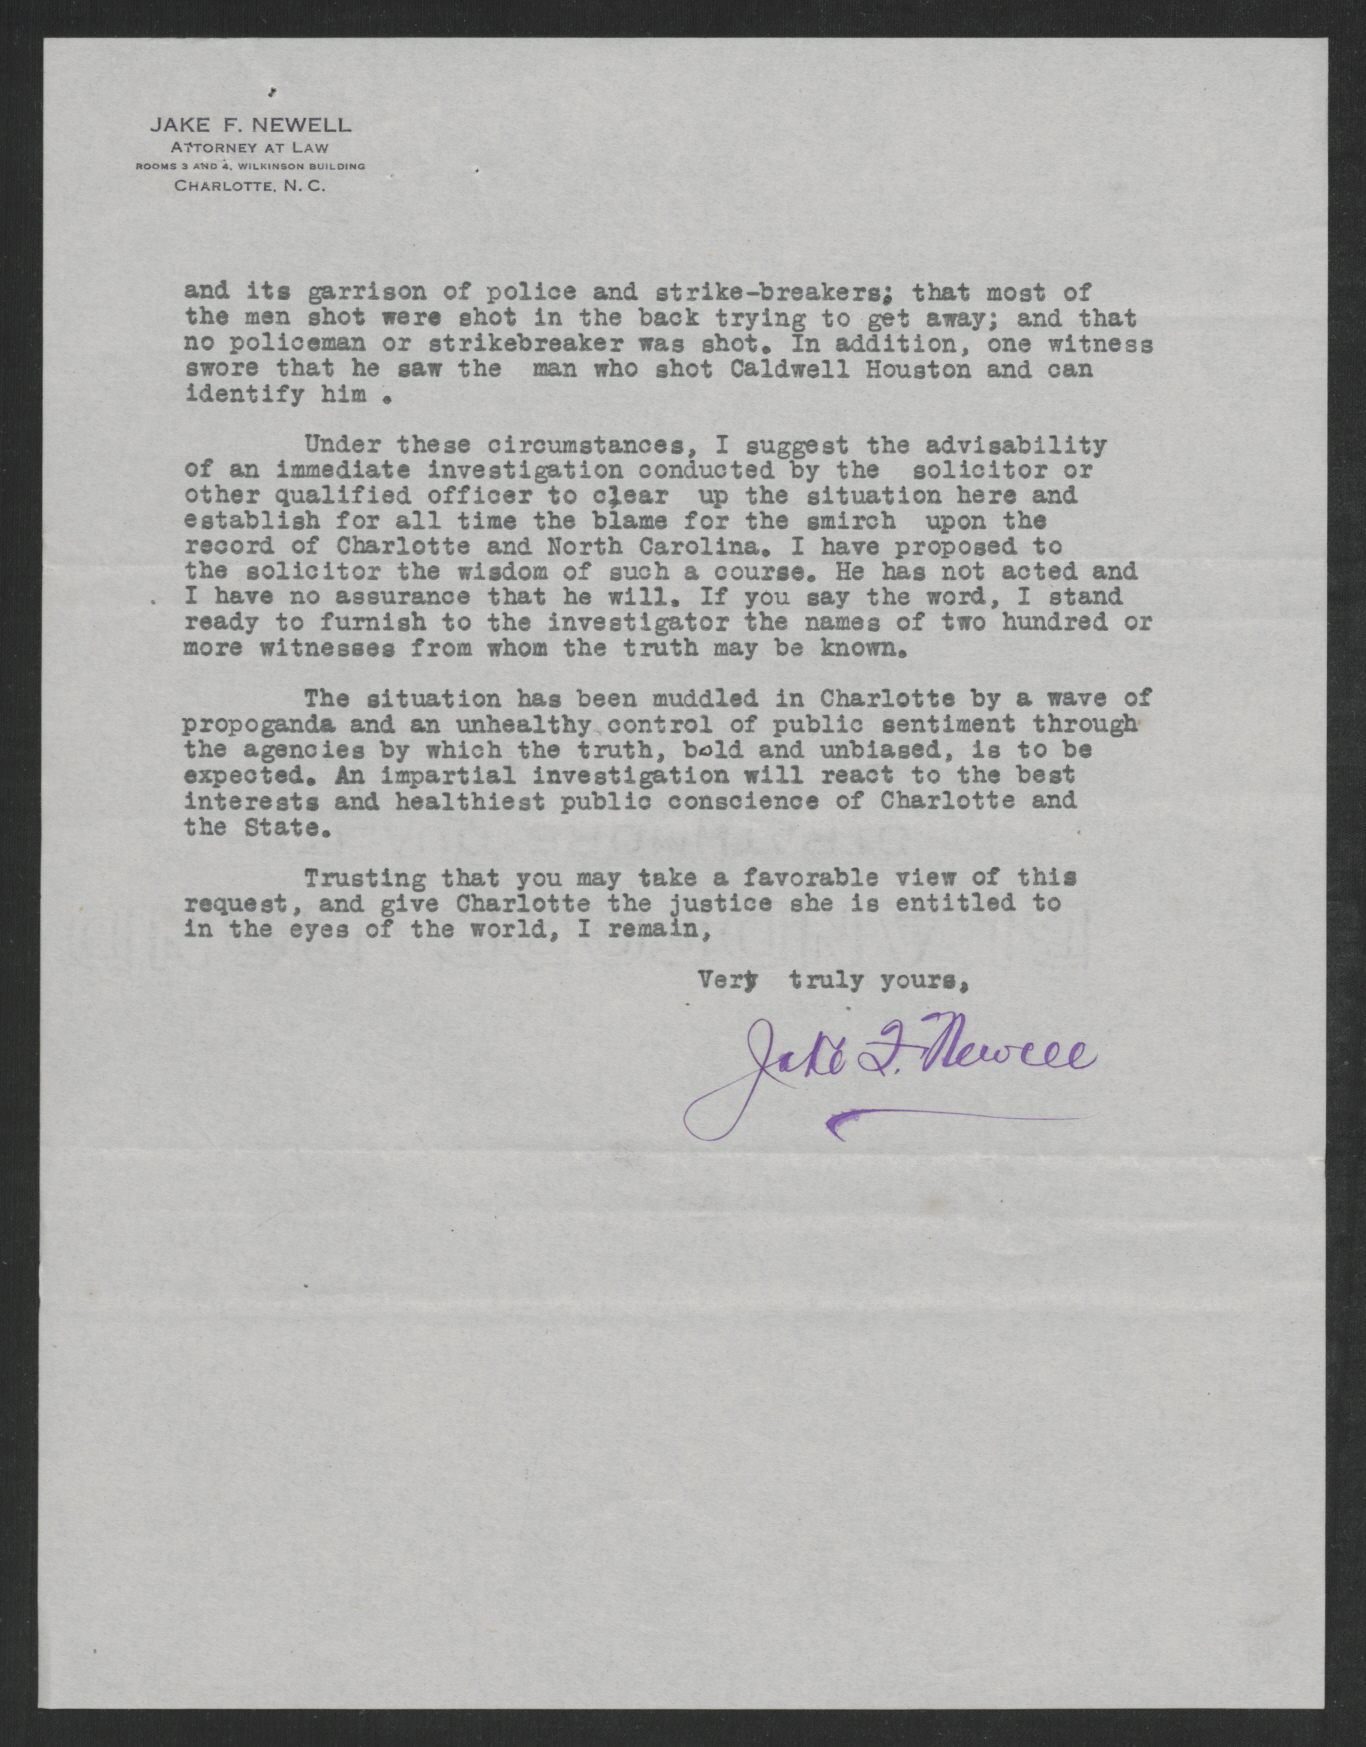 Letter from Jake F. Newell to Thomas W. Bickett, September 3, 1919, page 2